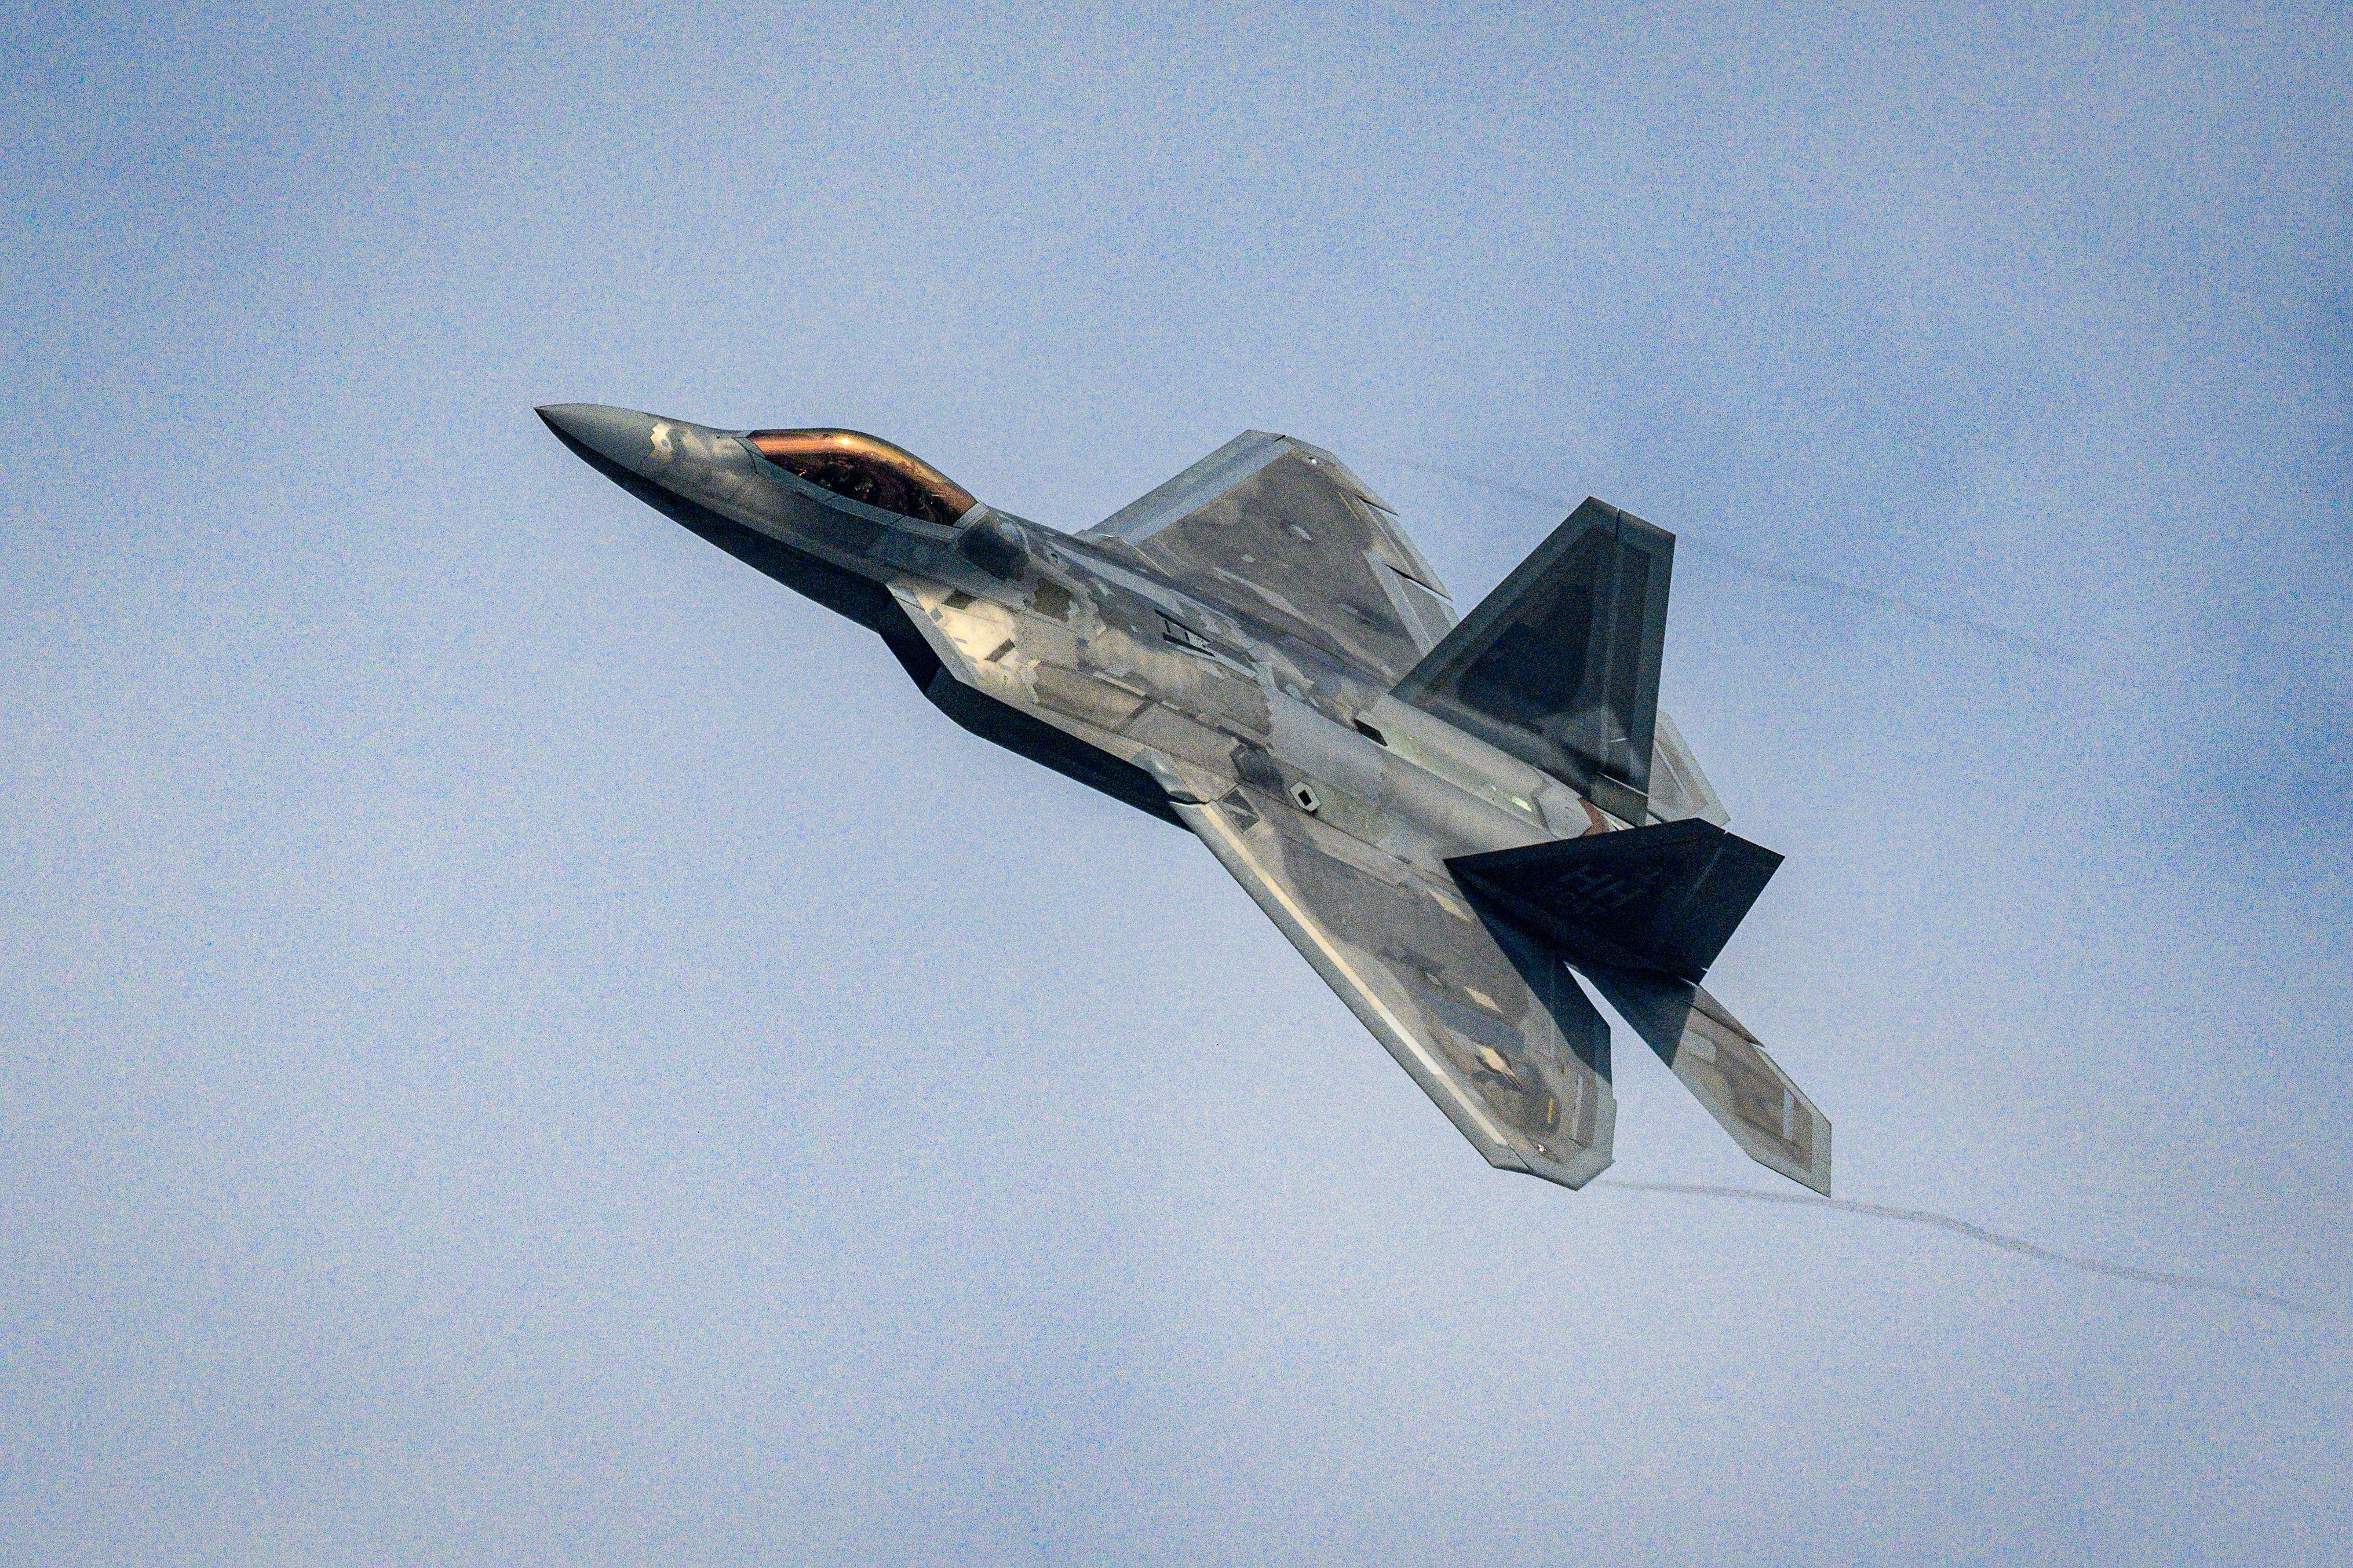 Chinese researchers say they have created an advanced method to detect the Lockheed Martin F-22 Raptor. Photo: AFP